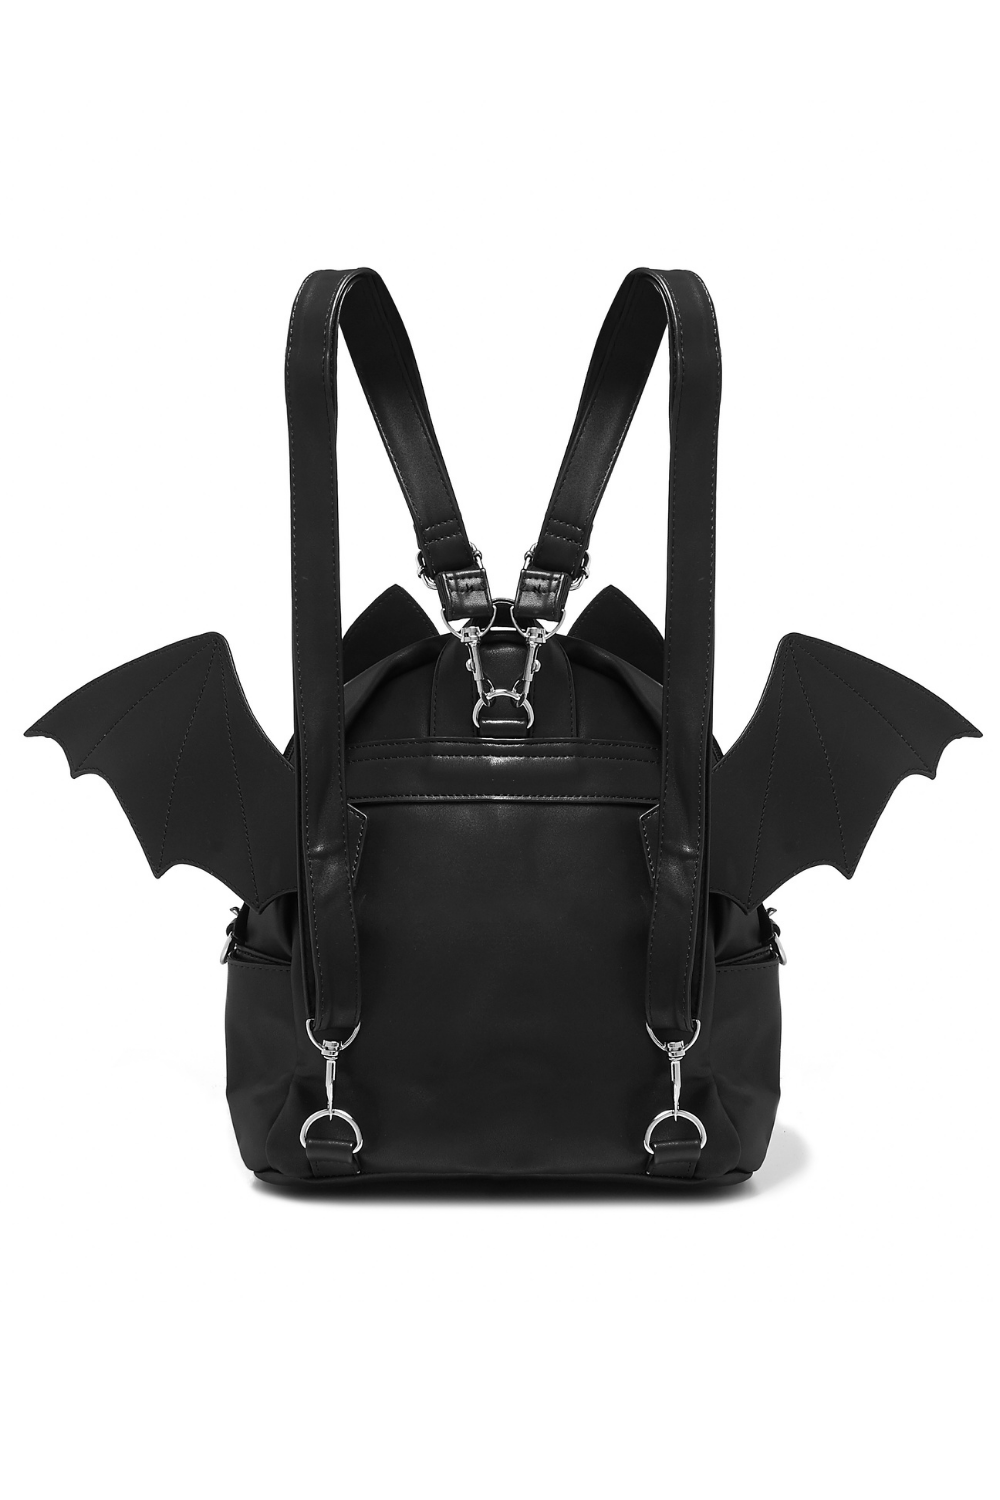 Back of Black backpack with bat wings